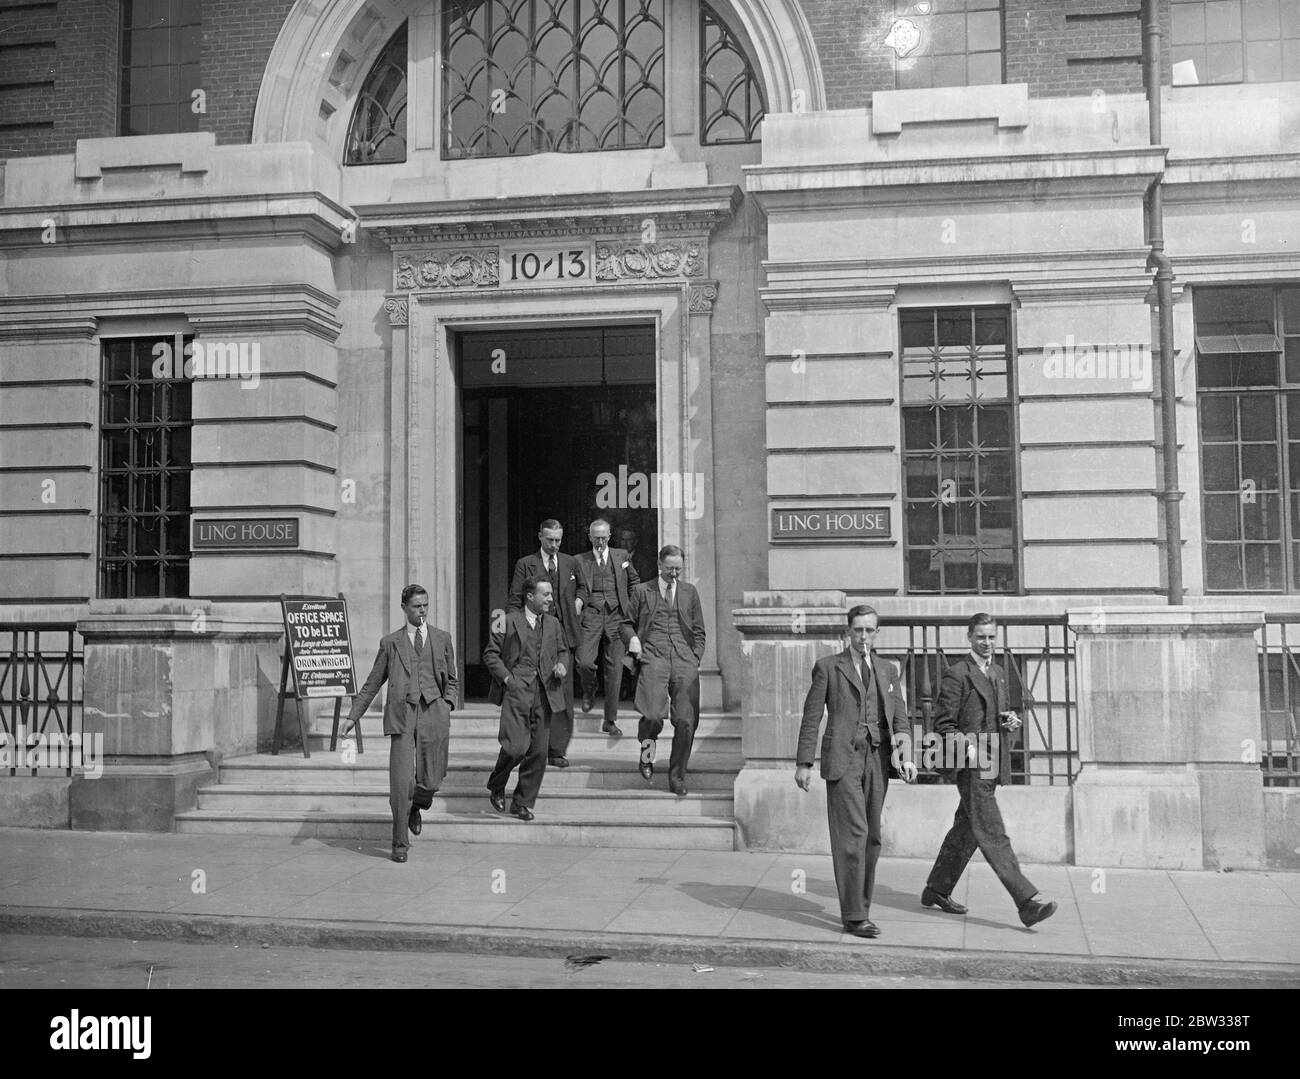 Bank of England opens secret branch for war loan work . The Bank of England has opened magnificent new premises in a great new building called Ling House , in South Street , near Finsbury Square , London , to cope with the rush of War loan conversions . The Bank has more than 250 clerks in the new temporary quarters . Clerks going out for tea , before carrying on through the evening on their rush job , at Ling House . 21 July 1932 Stock Photo